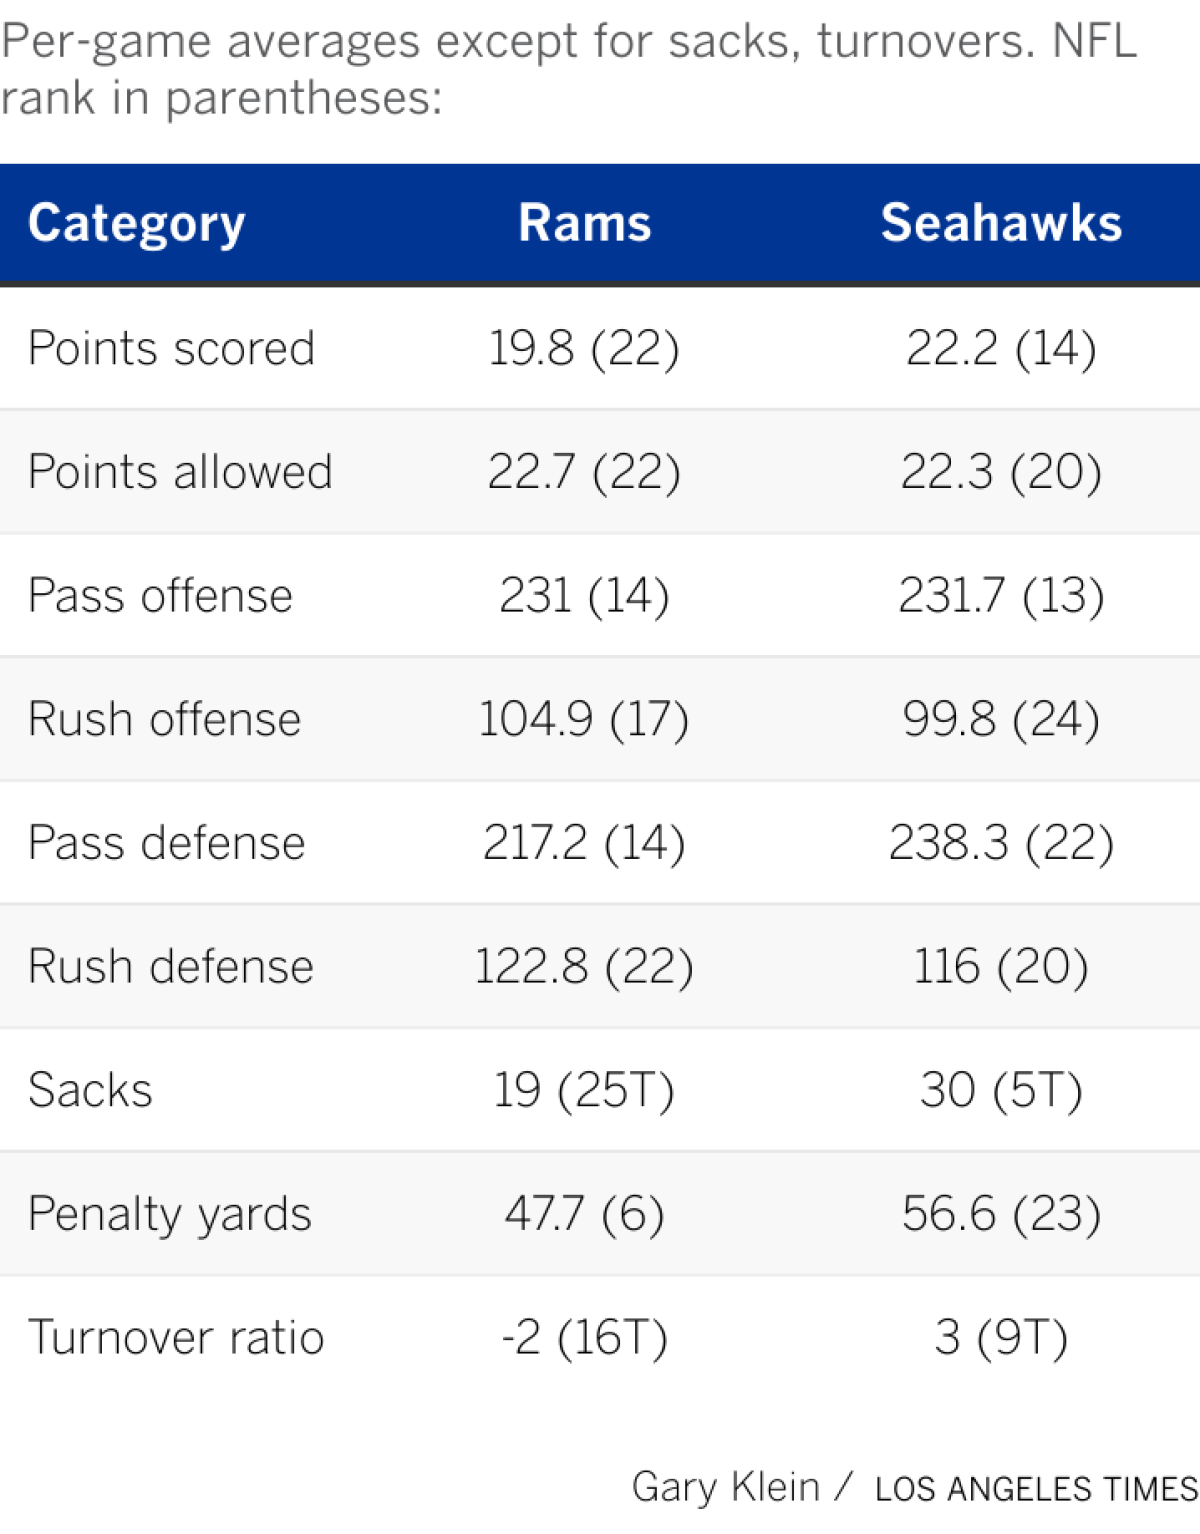 Breaking down the top team statistics for both the Rams and Seahawks.